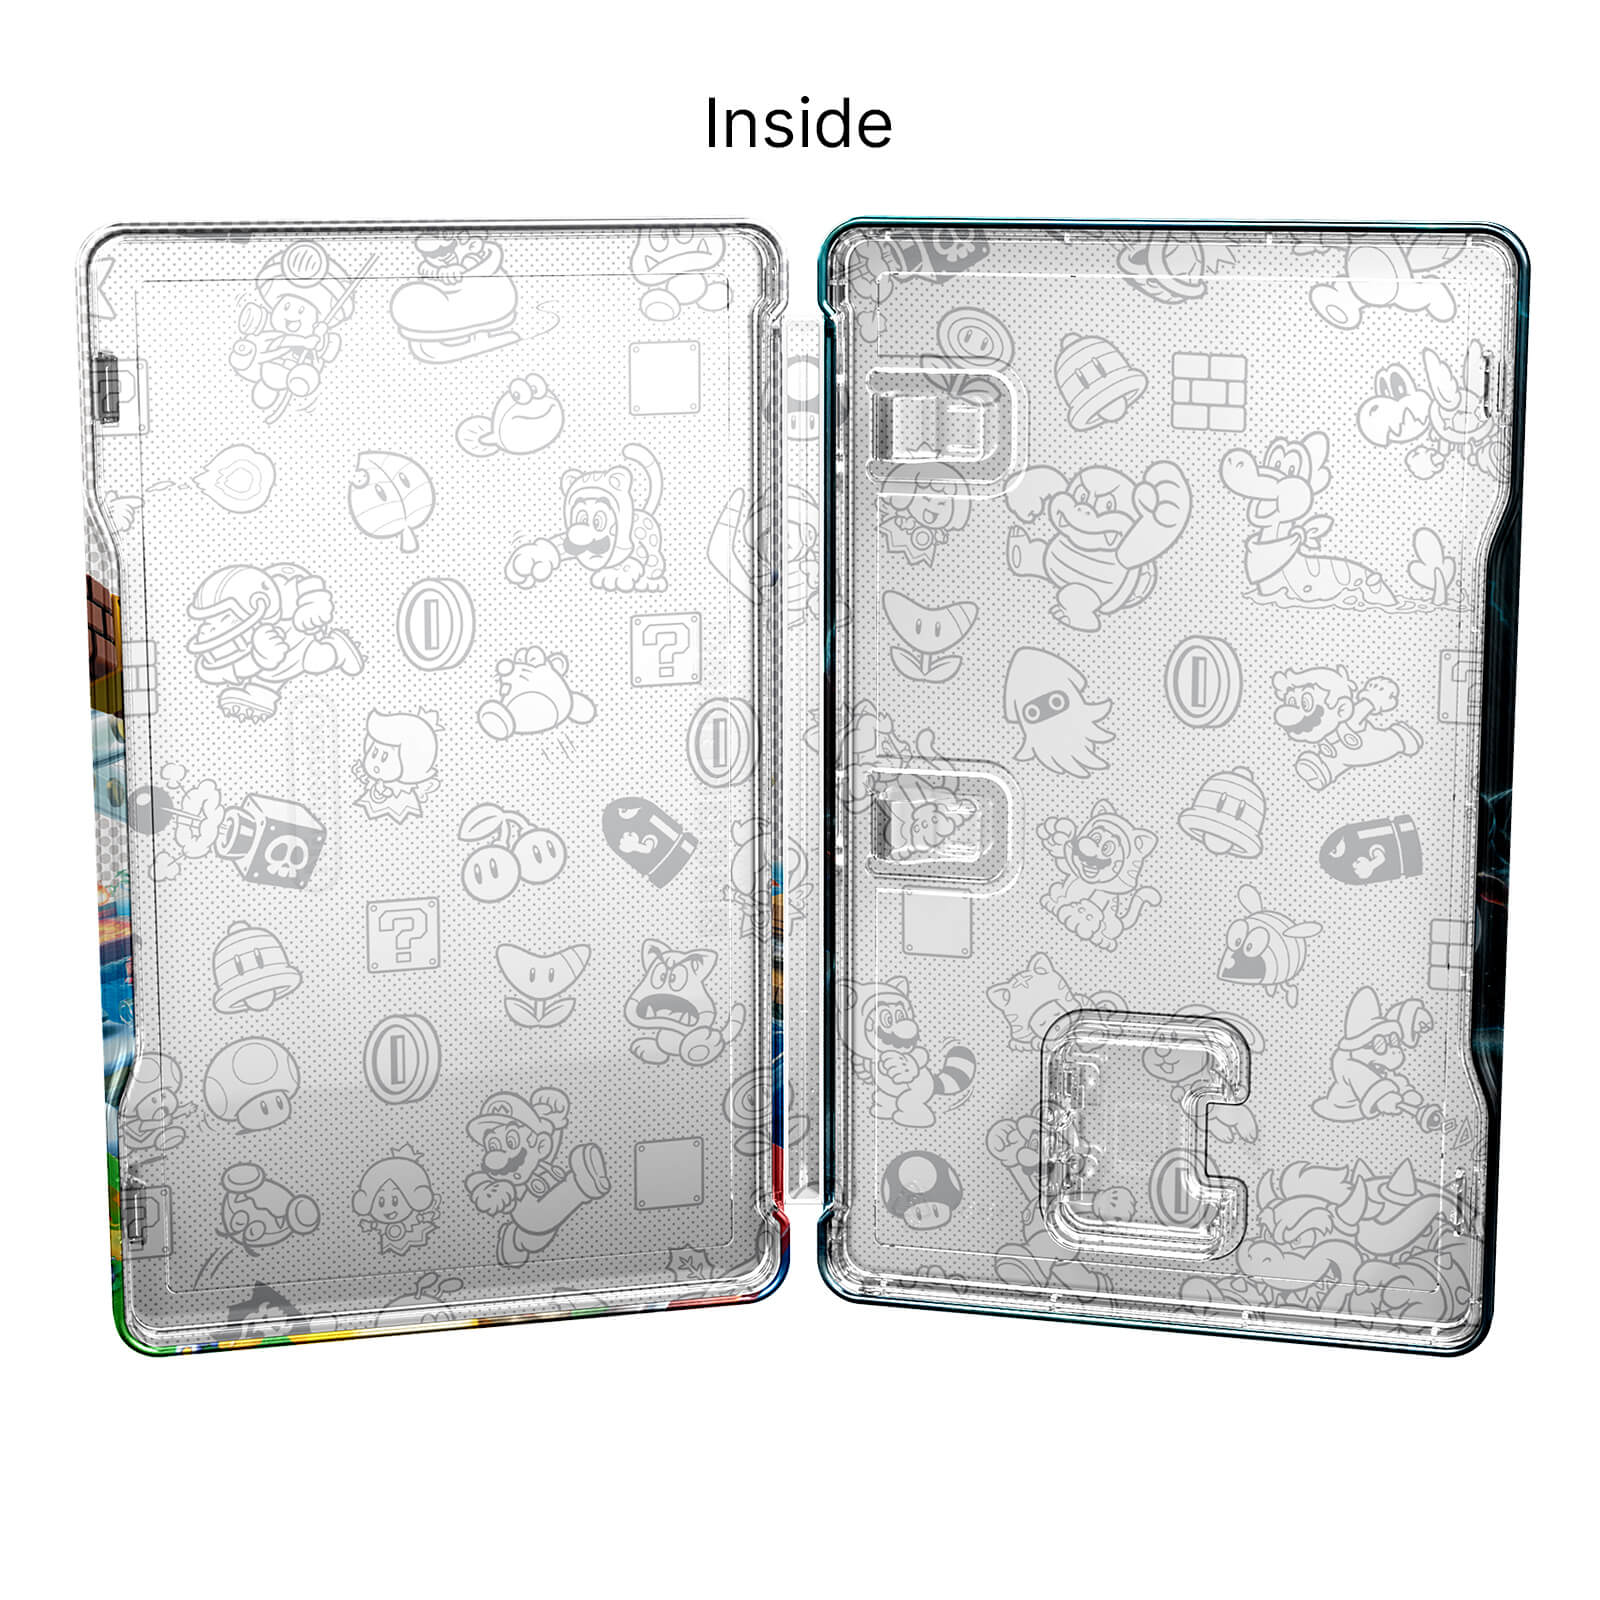 super mario 3d world and bowsers fury steelbook case photo 2